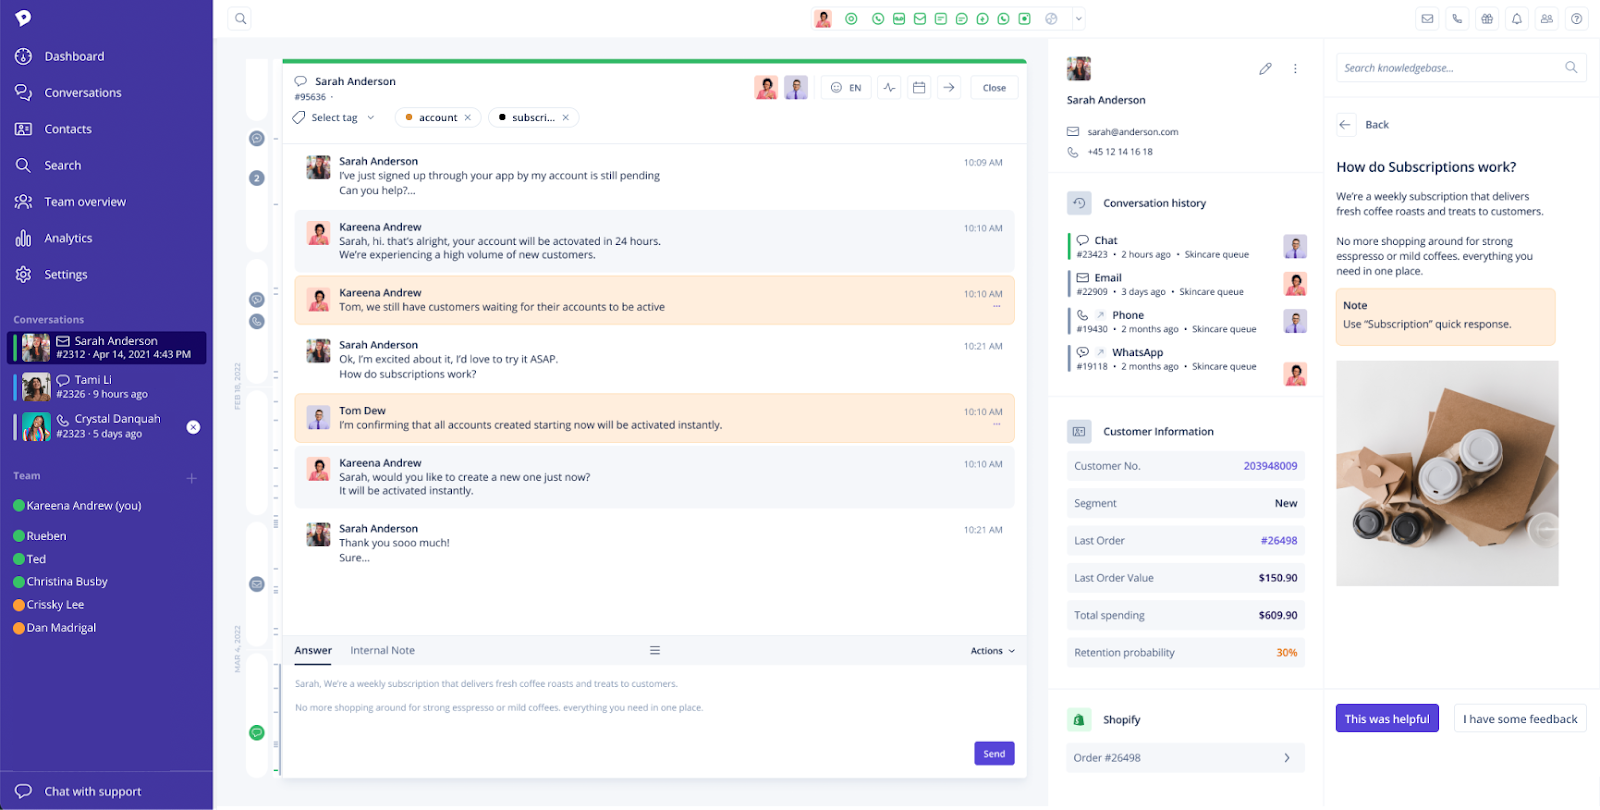 Screenshot of the Dixa customer service platform, recognized as a HappyFox alternative. The interface features a navigation bar on the left with options like Dashboard, Conversations, and Analytics. The center section shows an ongoing conversation with a customer named Sarah Anderson, who is inquiring about her account status and subscription details. The right side of the screen provides a comprehensive view of Sarah's profile, including contact information, conversation history across multiple channels like chat and email, and a knowledge base article on how subscriptions work. Additionally, there's customer information detailing order history and spending, indicative of Dixa's integrated approach to customer engagement.